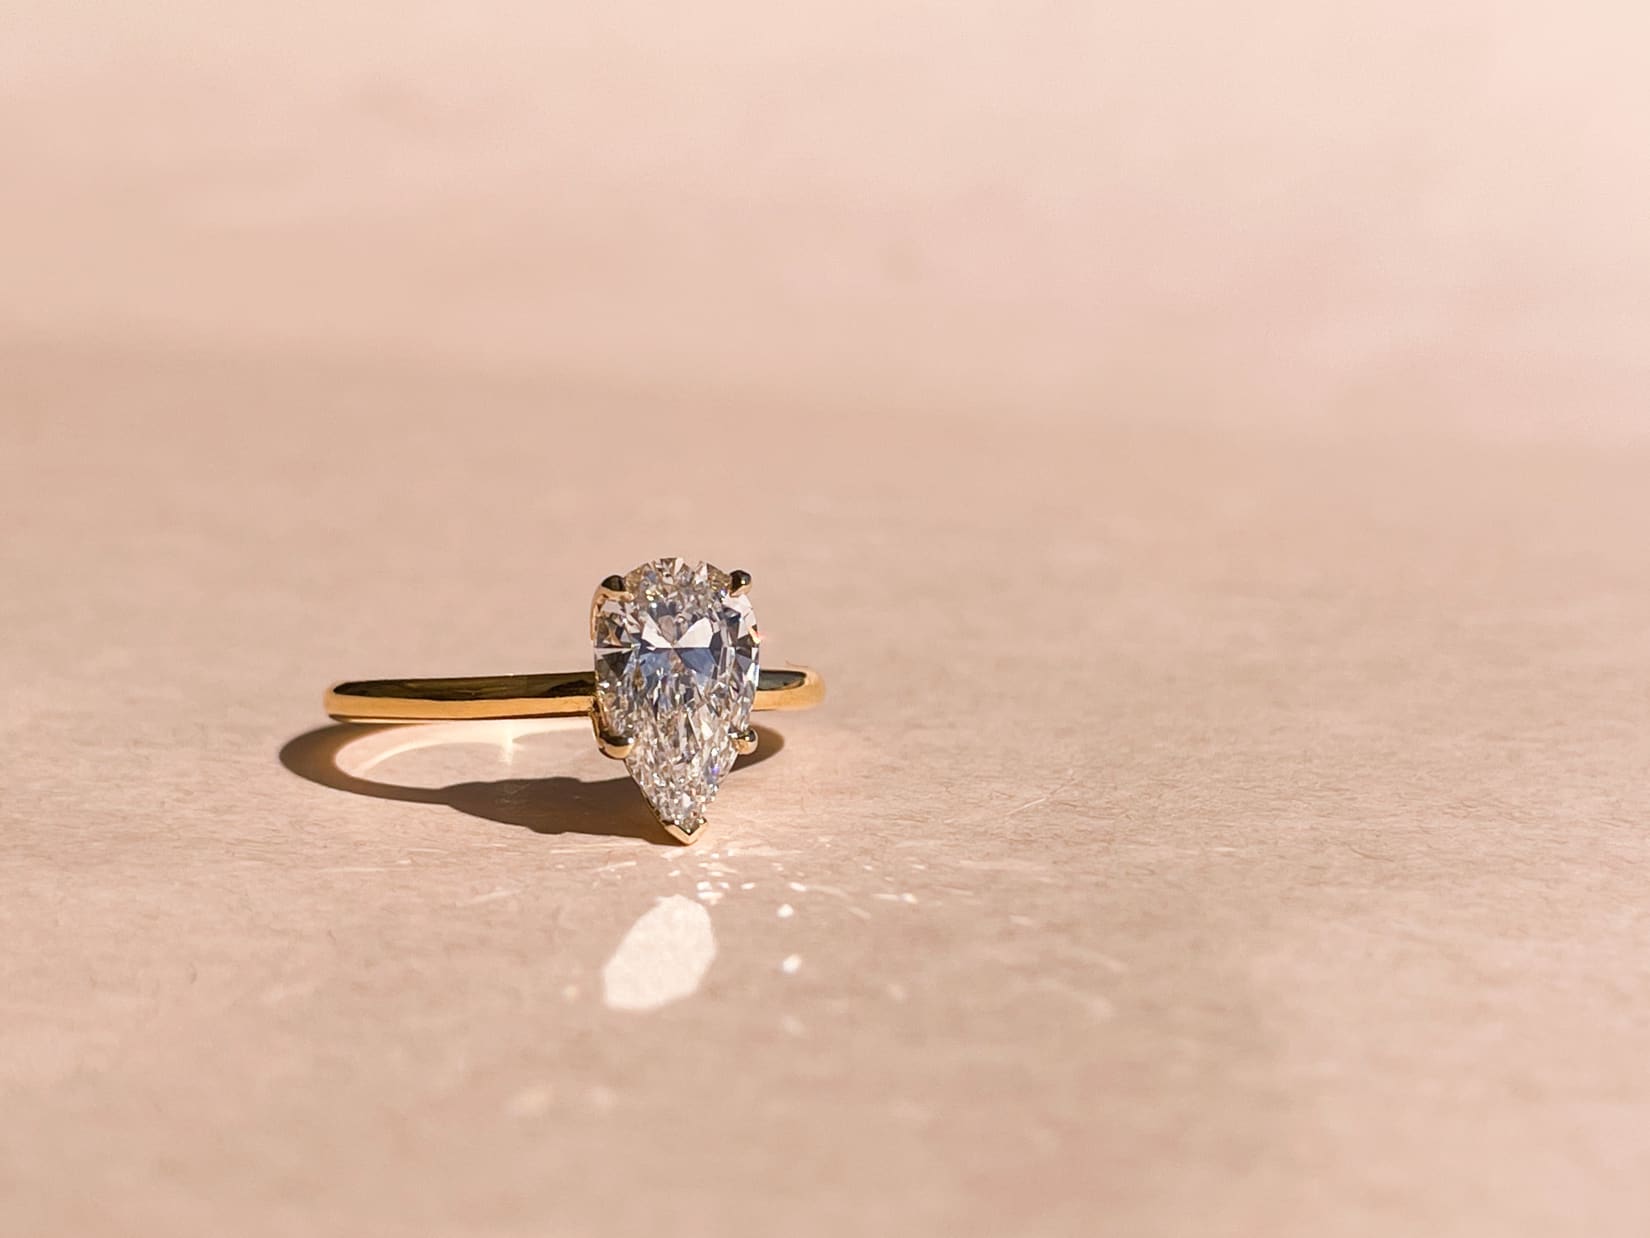 How to Buy a Pear Cut Diamond Engagement Ring NZ Cover Photo